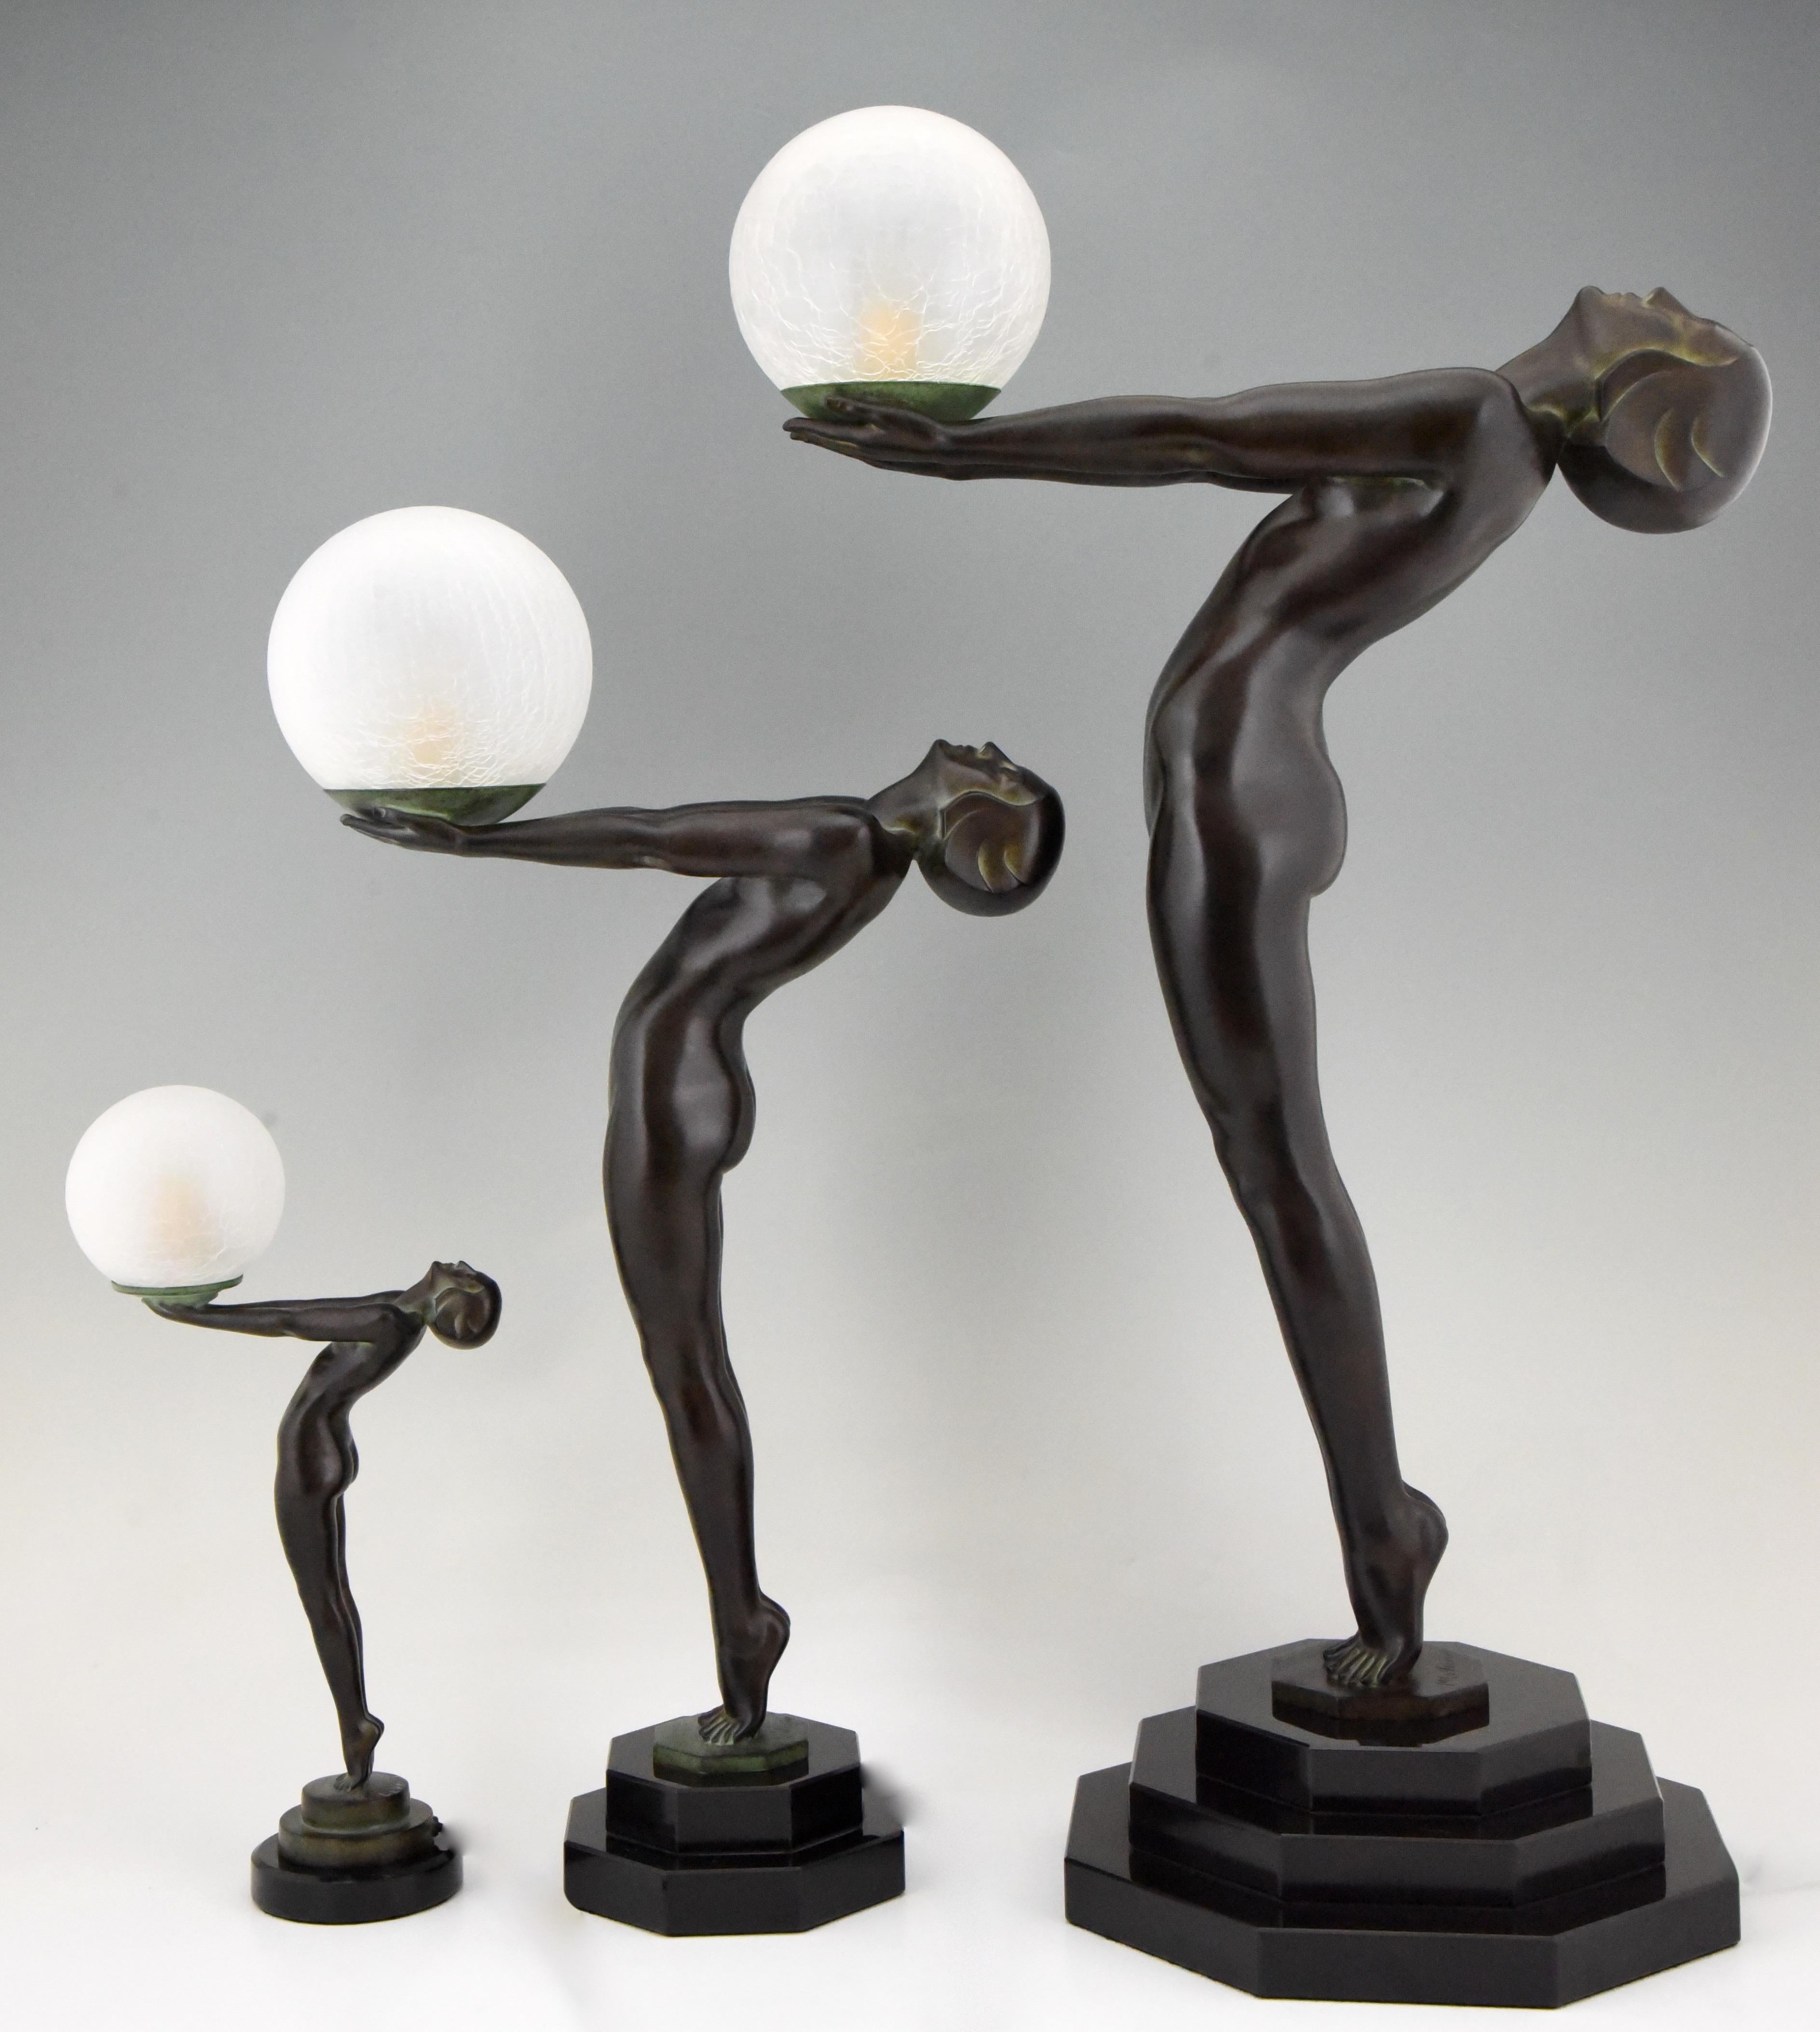 Contemporary Pair of Clarté Art Deco Style Lamps Max Le Verrier Nude with Globe 84 cm 33 inch